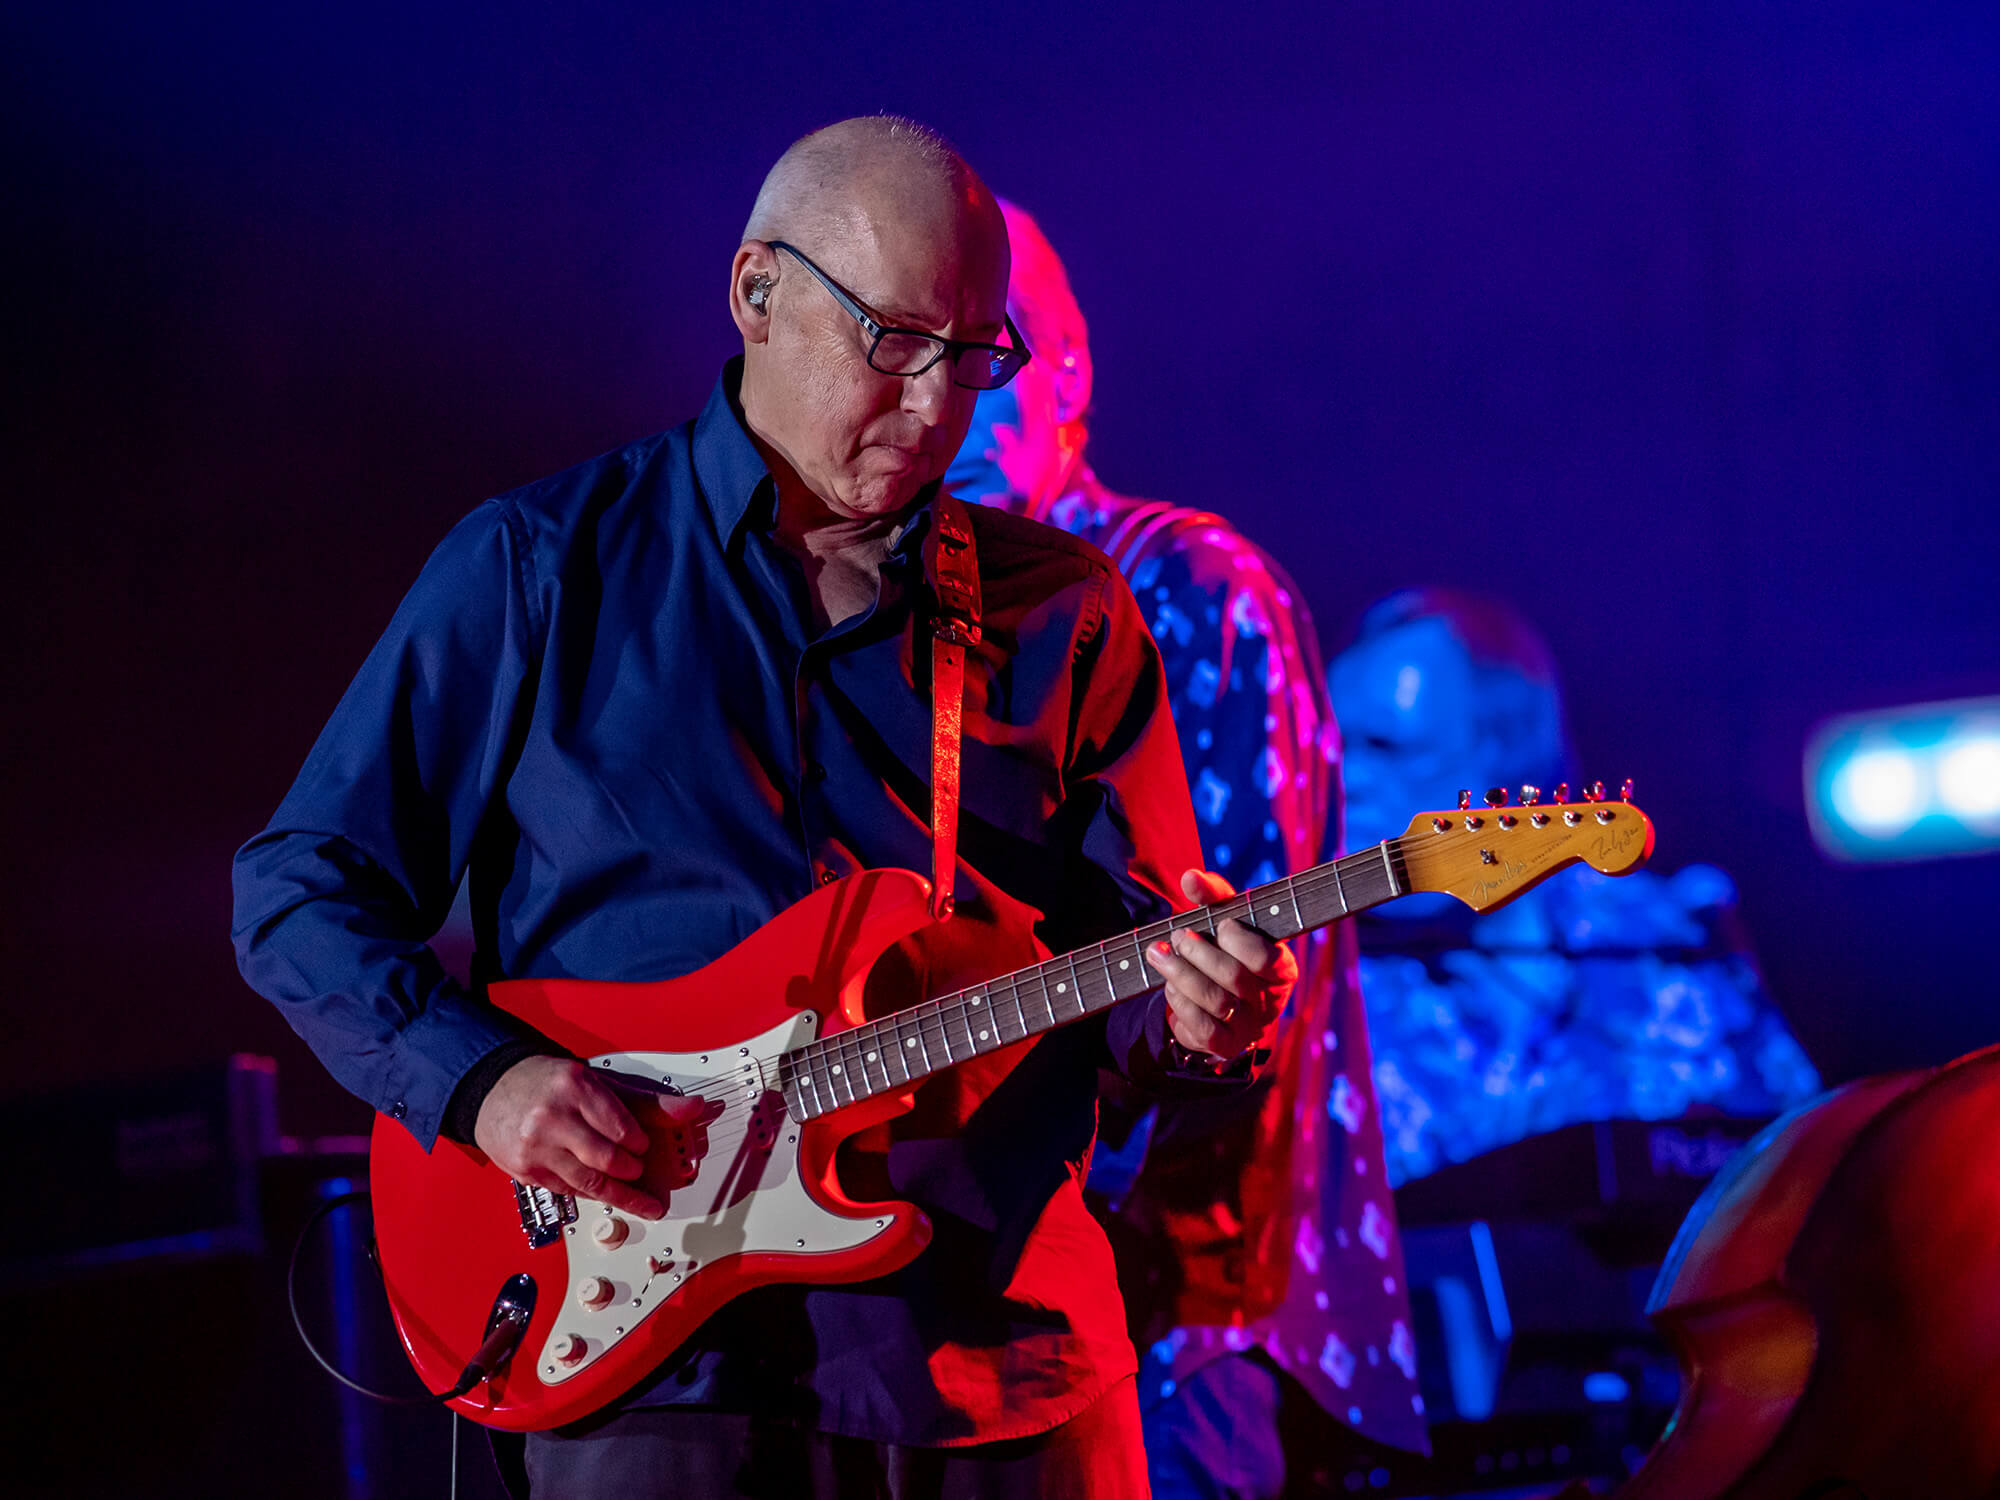 Mark Knopfler on stage playing a red Stratocaster